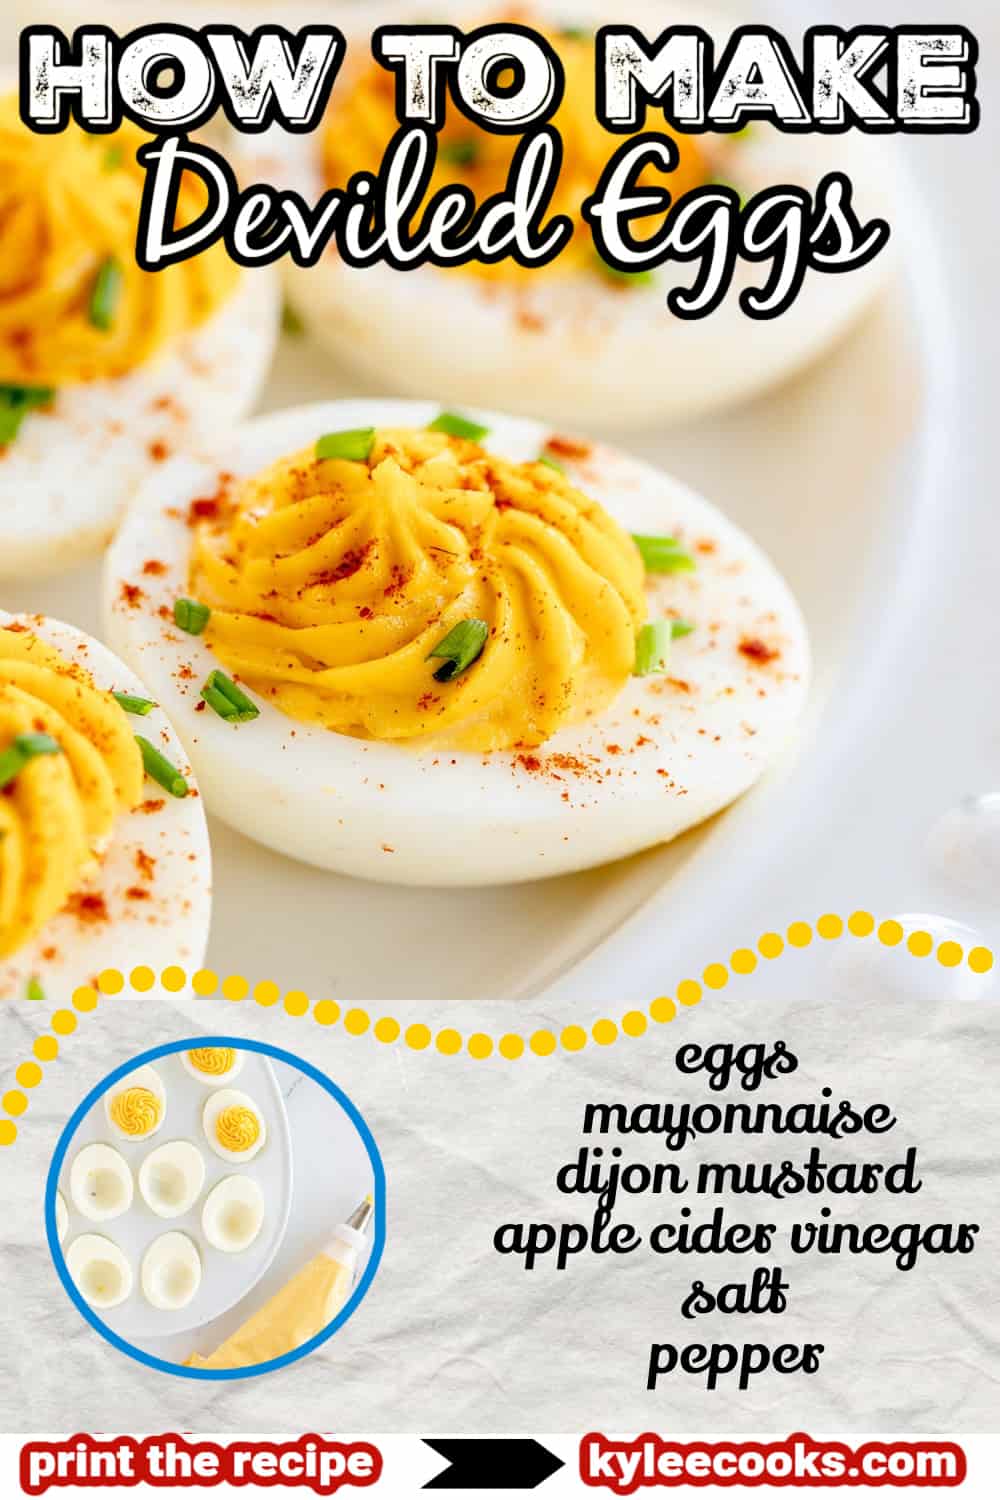 deviled egg image with ingredients and text overlay